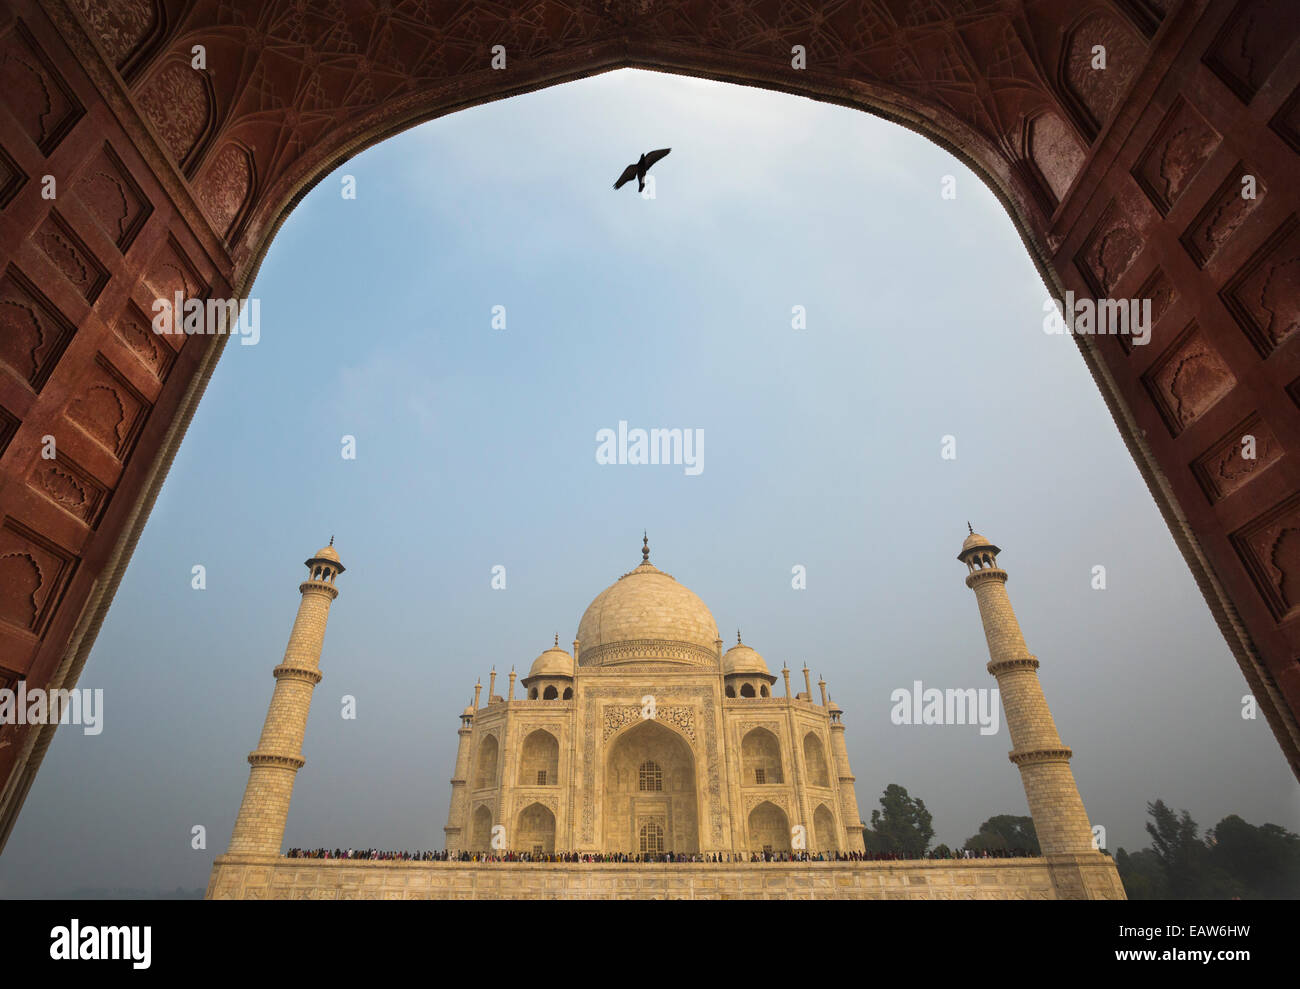 A bird flying near the Taj Mahal, a monument built by Mughal emporer Shah Jahan in honor of his thrid wife in Agra India. Stock Photo